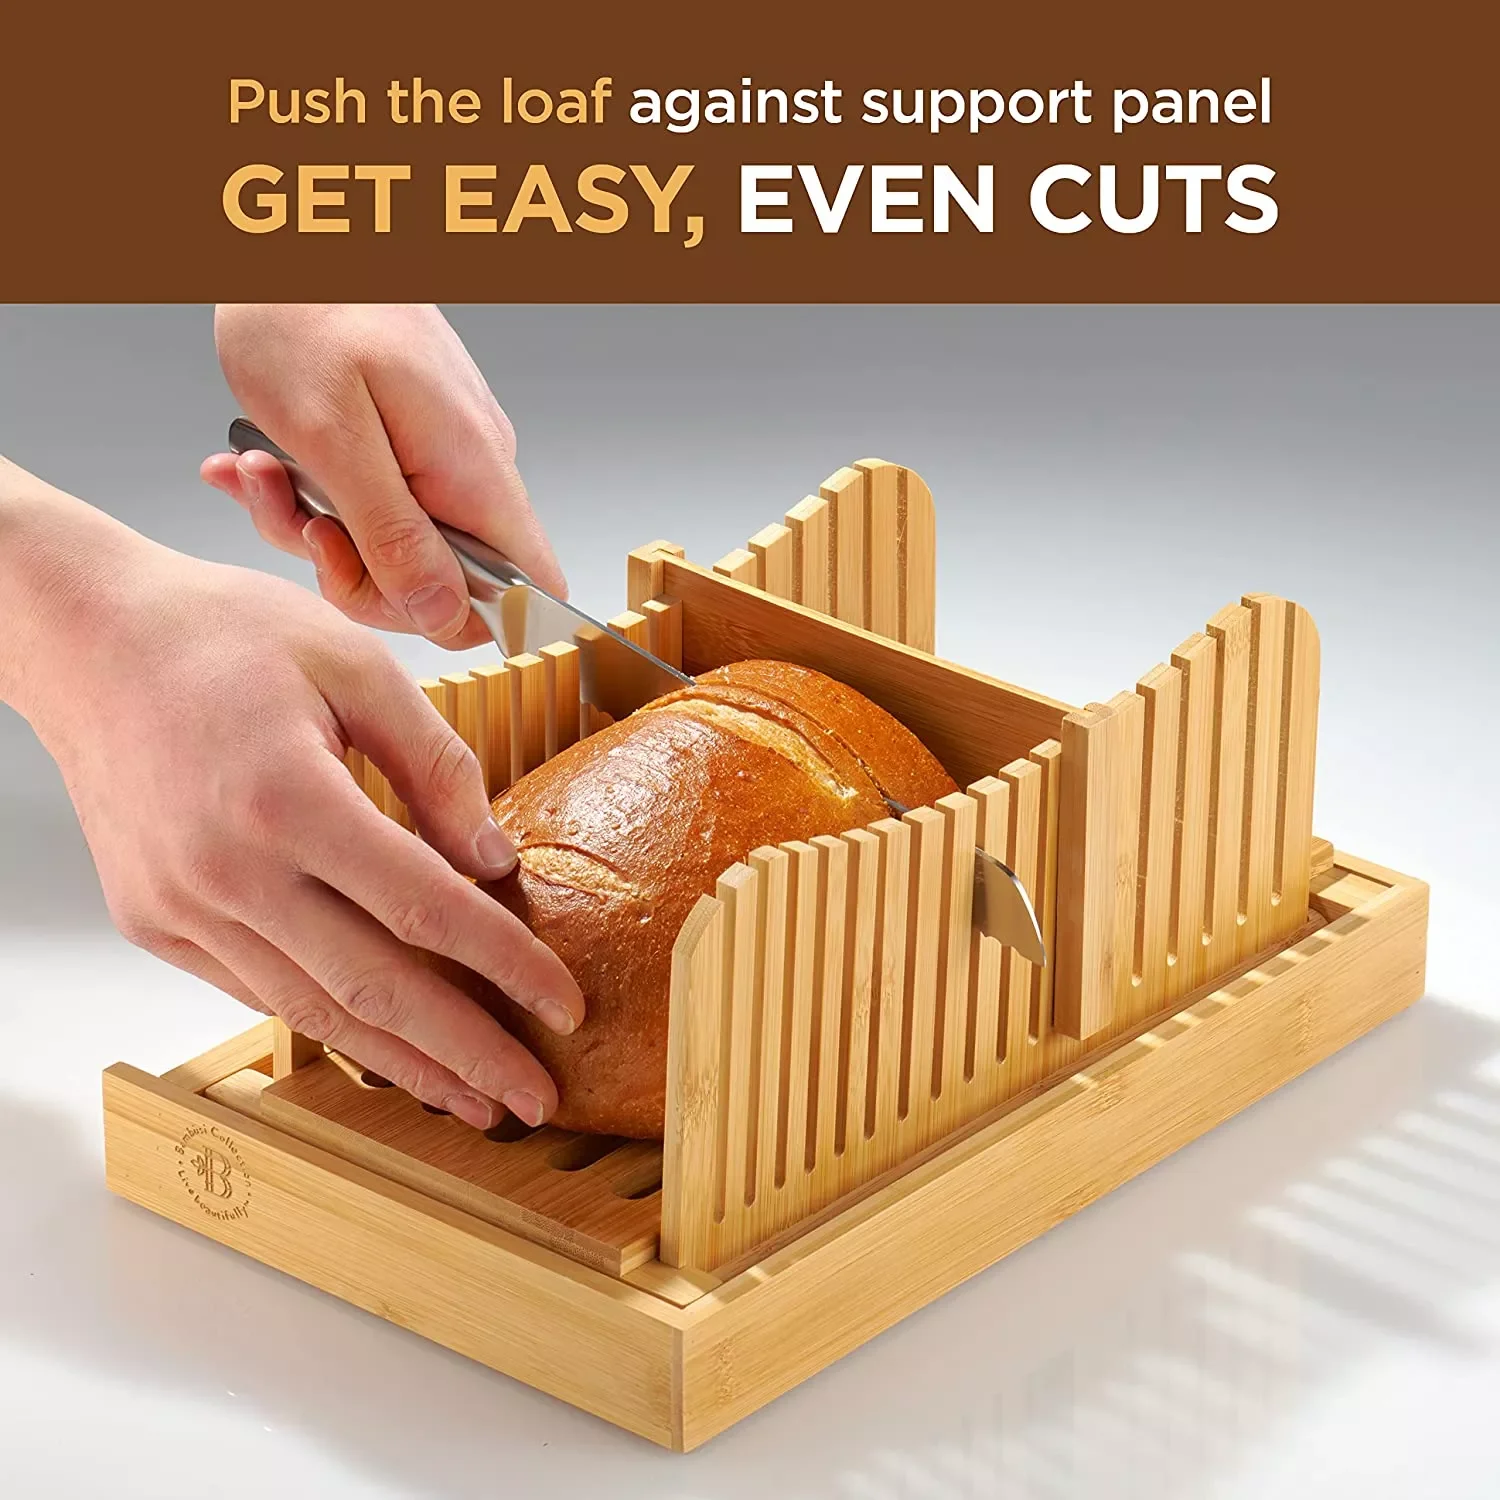 

Bamboo Bread Slicer Cutting Guide with Knife - 3 Slice Thickness Foldable Compact Cutting Board with Crumb Tray Stainless Steel